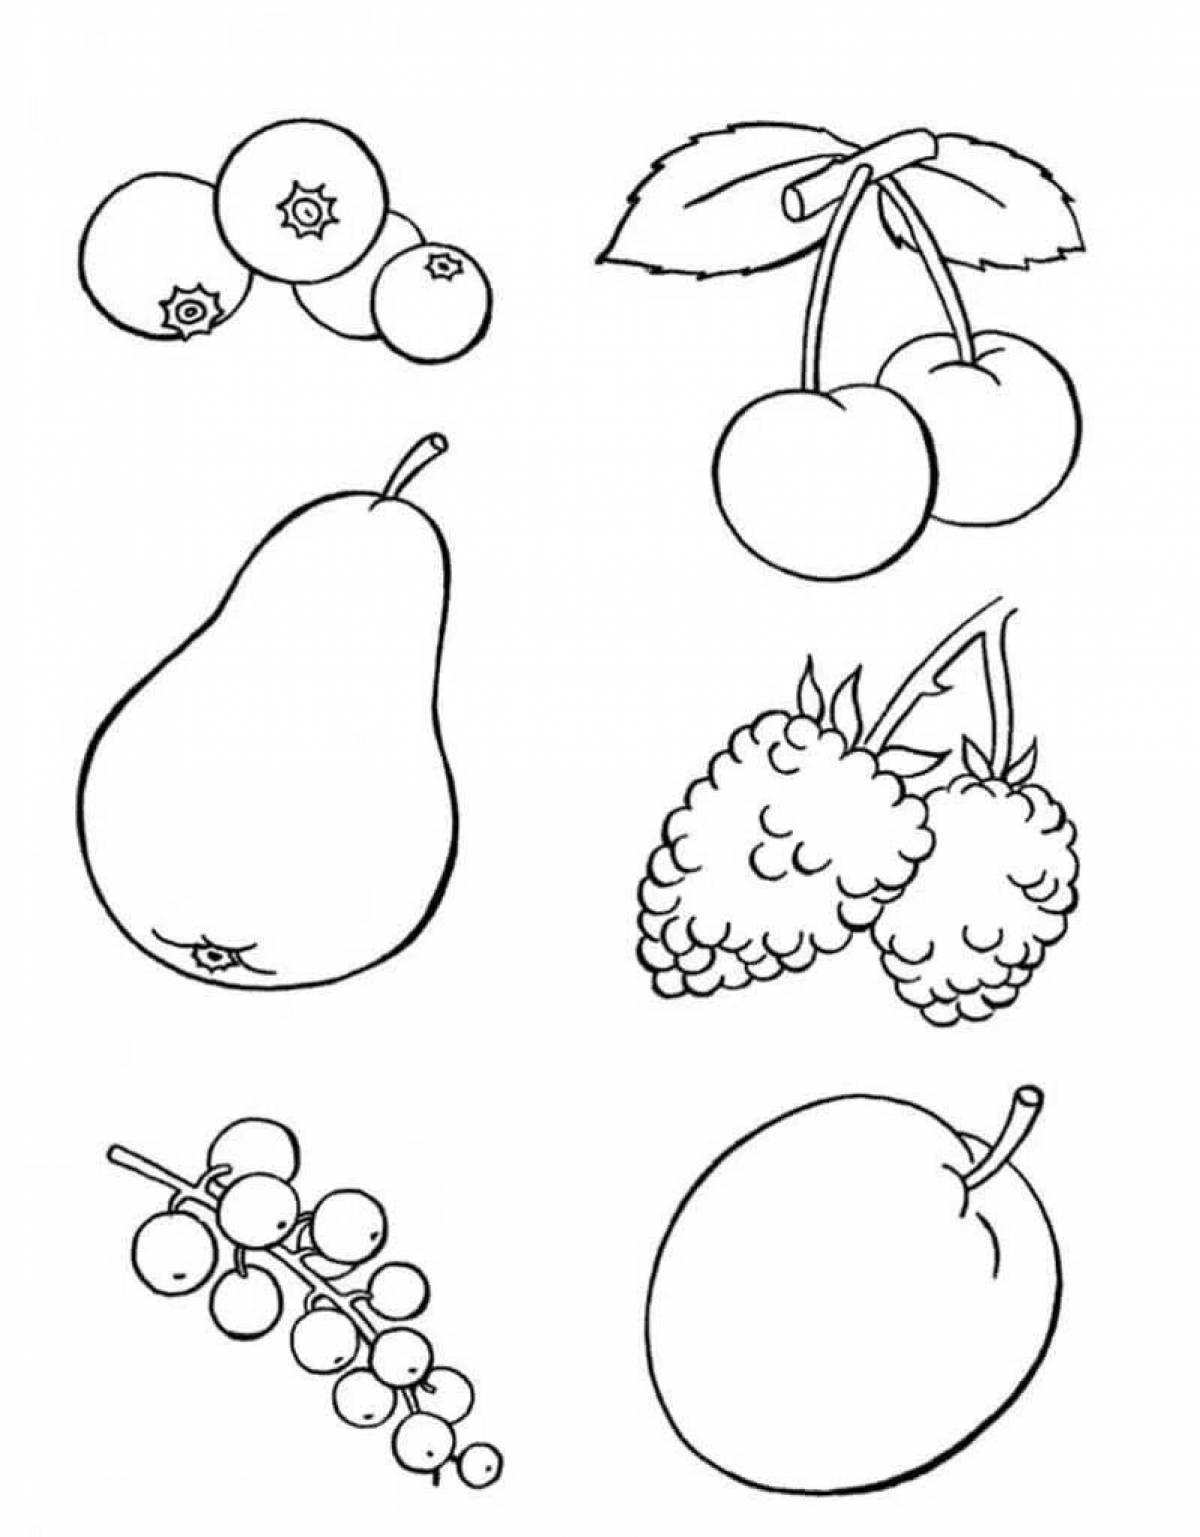 Stylish berries and fruits coloring pages for kids